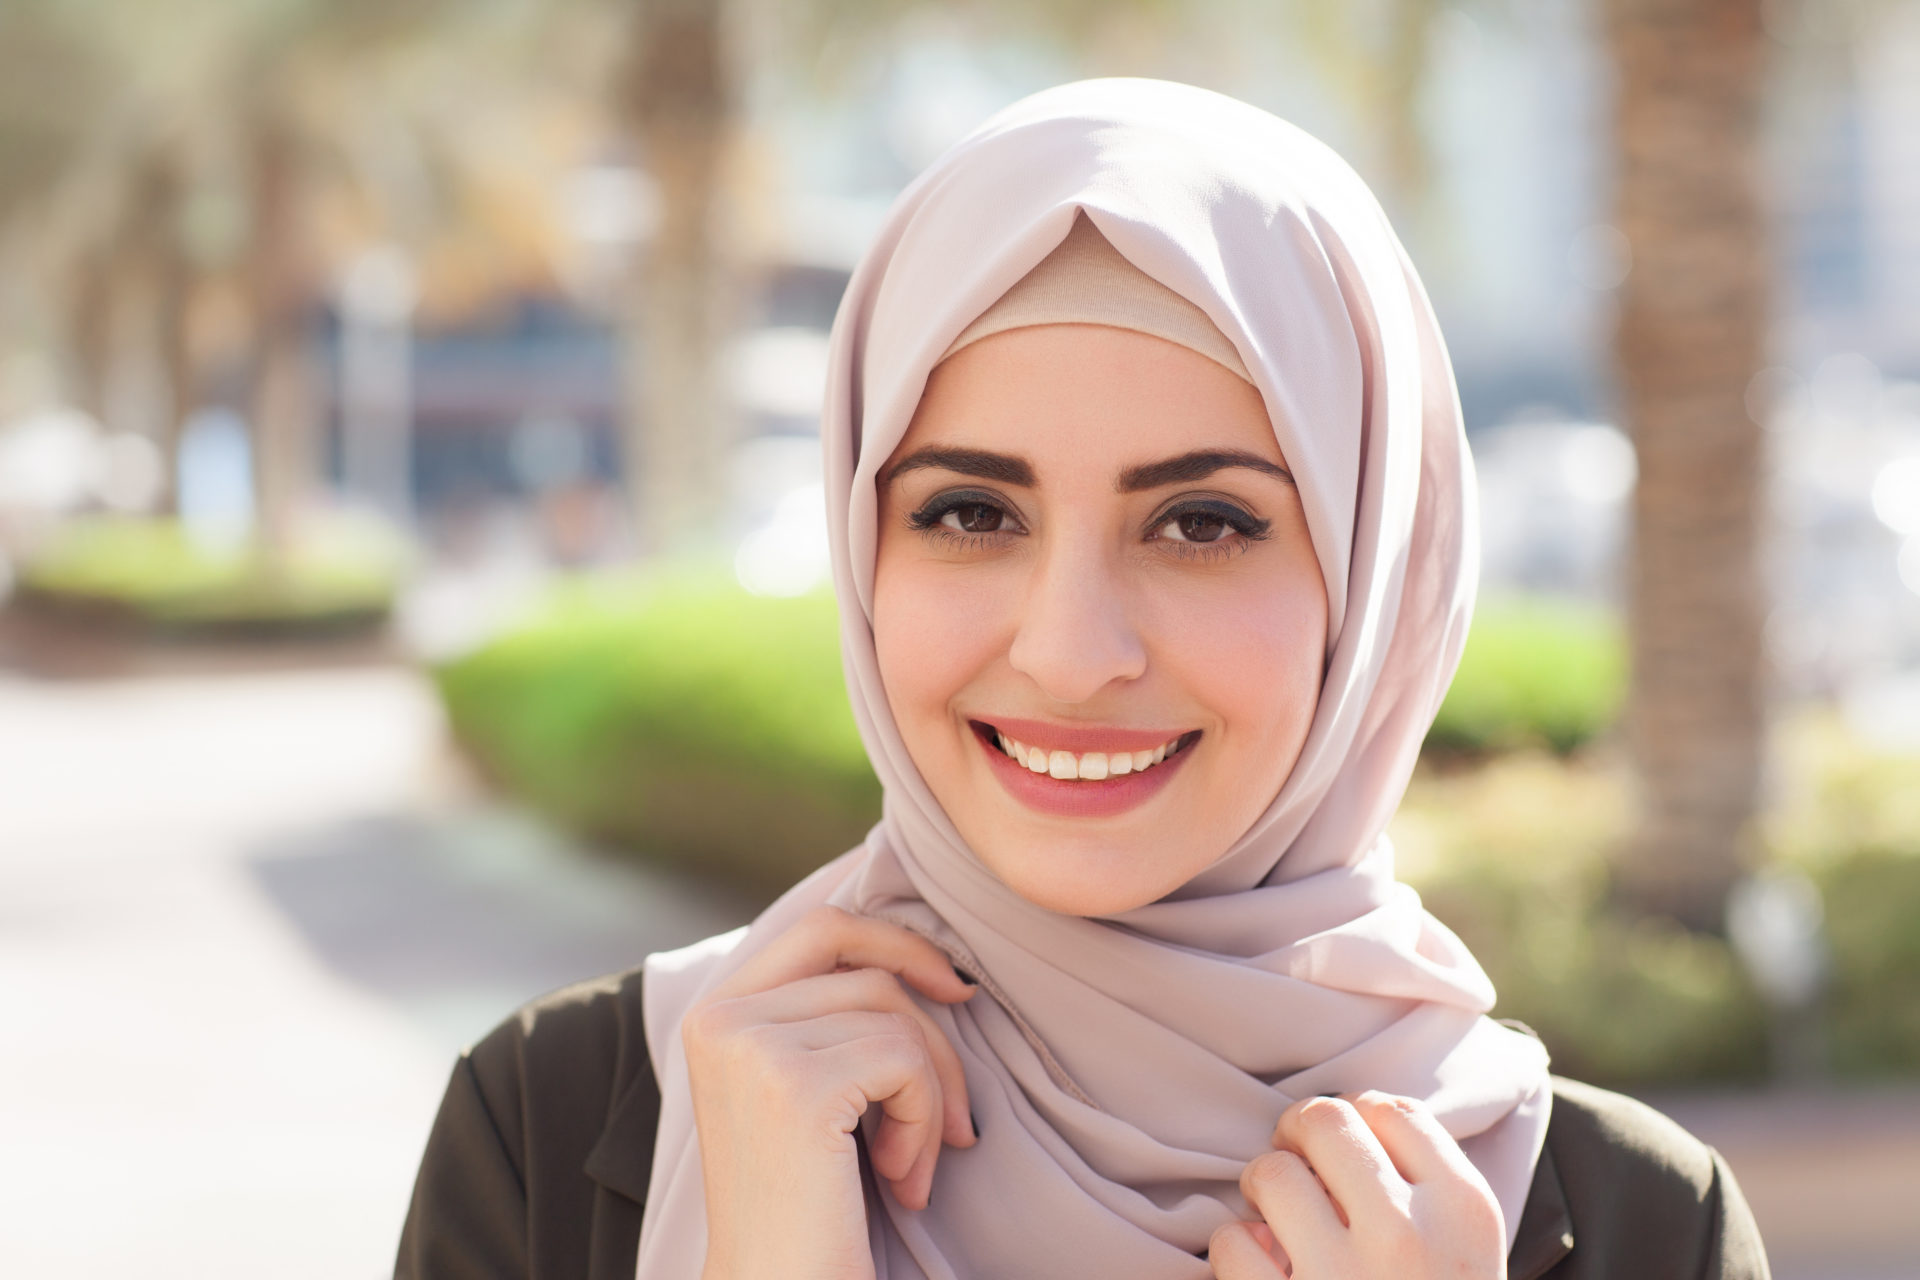 OU Female Muslim Students Address Incorrect Perceptions Surrounding Hijab, Expressions of Their Religion